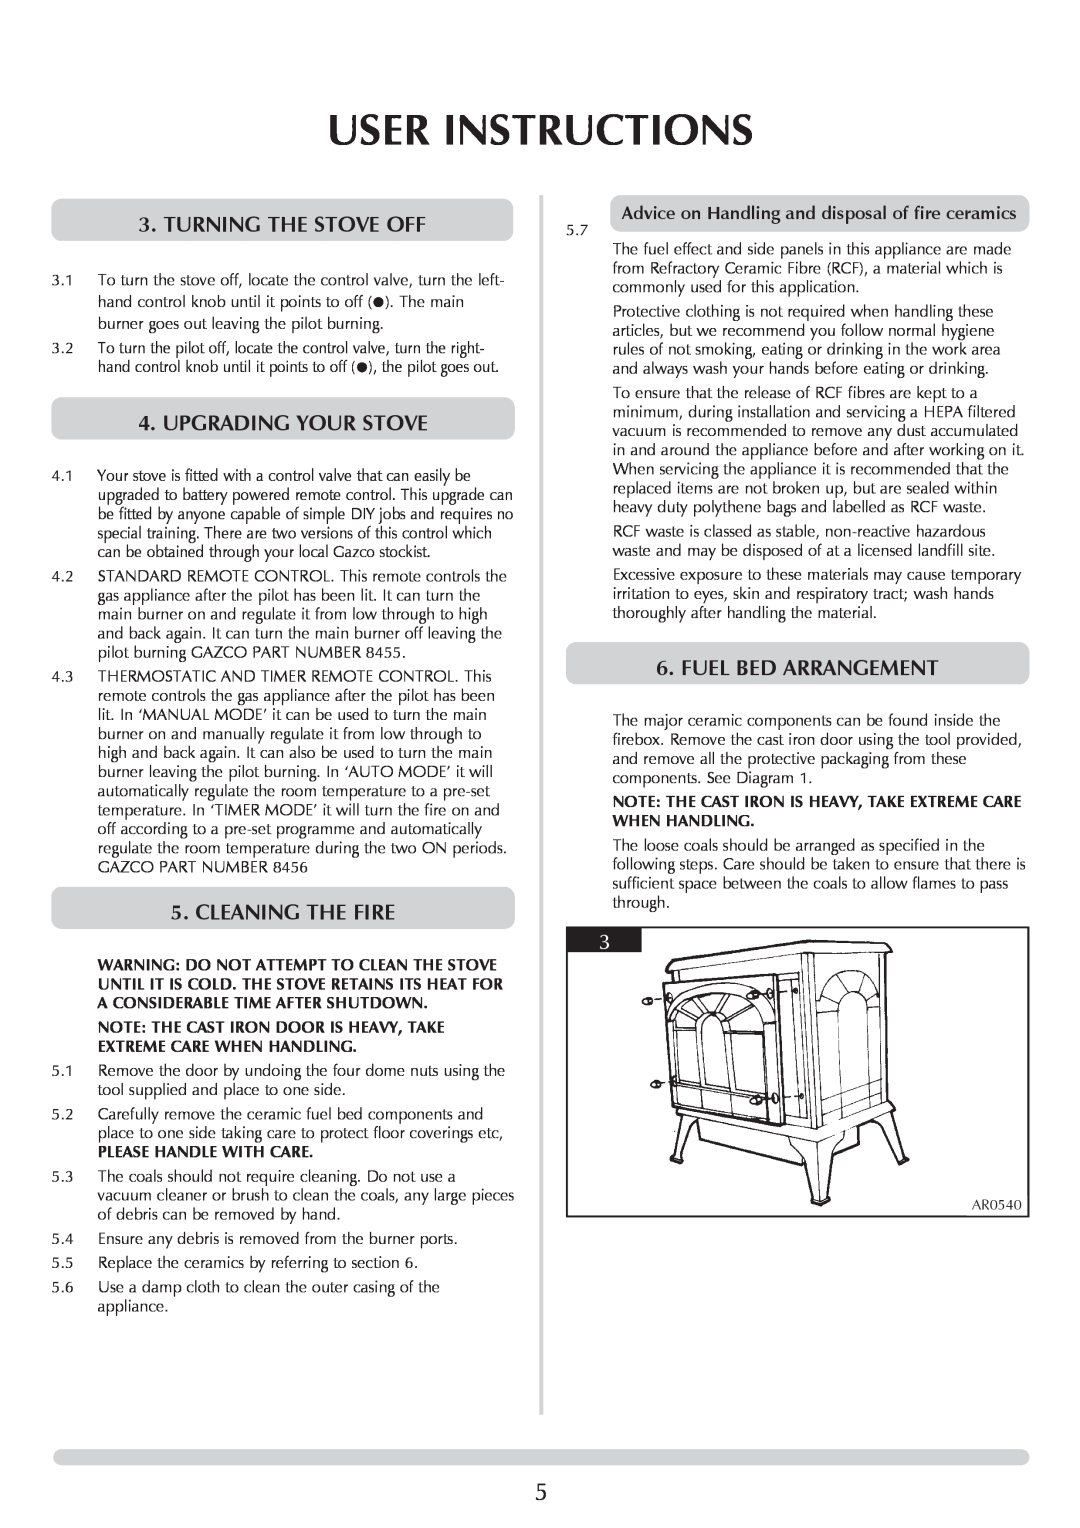 Stovax 8519-P8519 User Instructions, Turning The Stove Off, Upgrading Your Stove, Cleaning The Fire, Fuel Bed Arrangement 